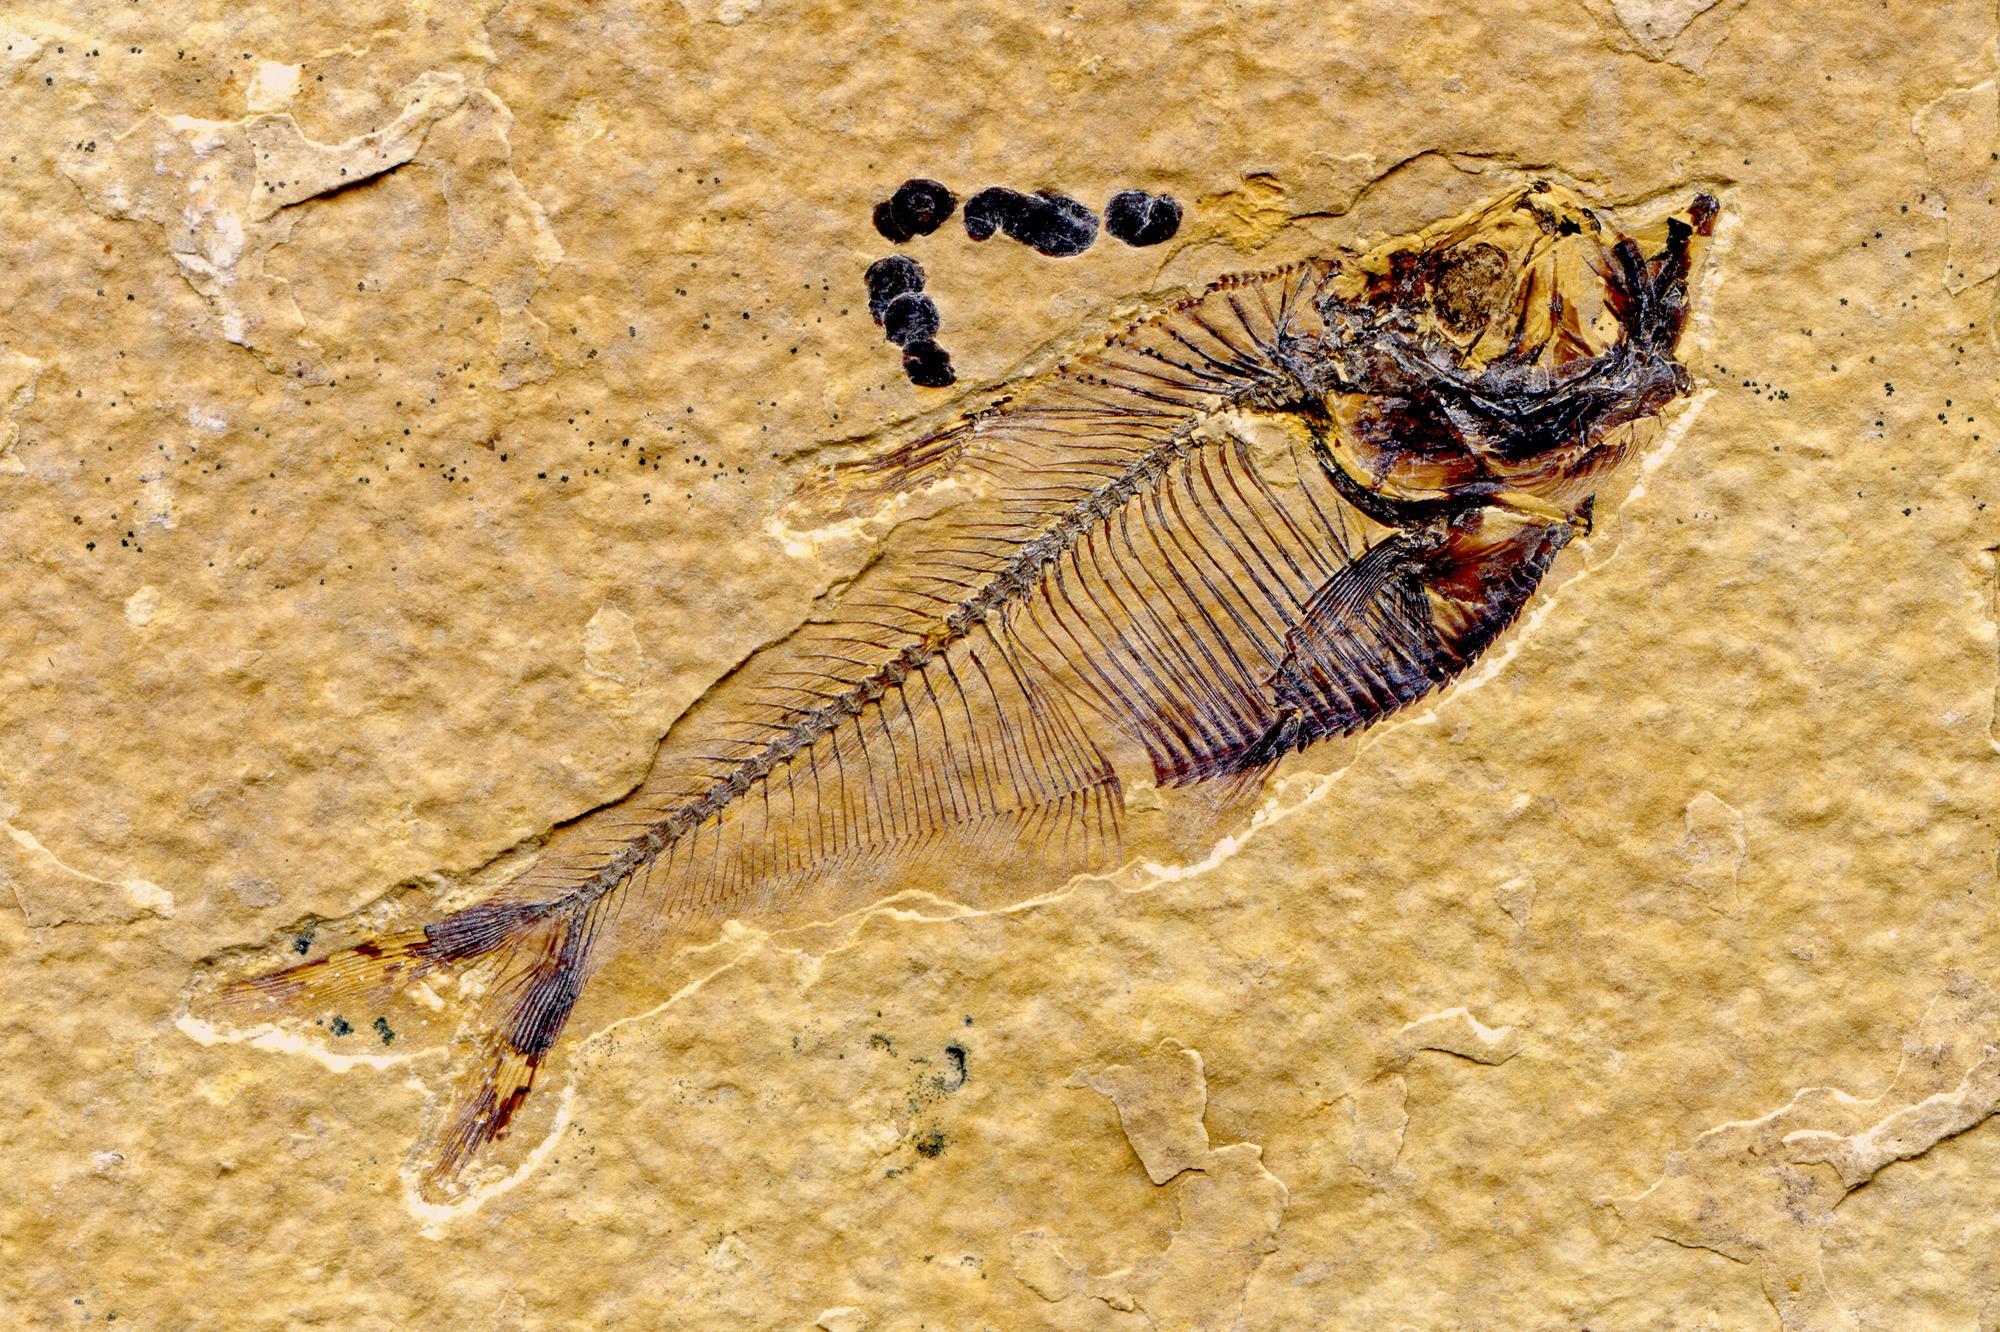 Rotting fish experiments reveal how organs fossilise | Research | Chemistry  World